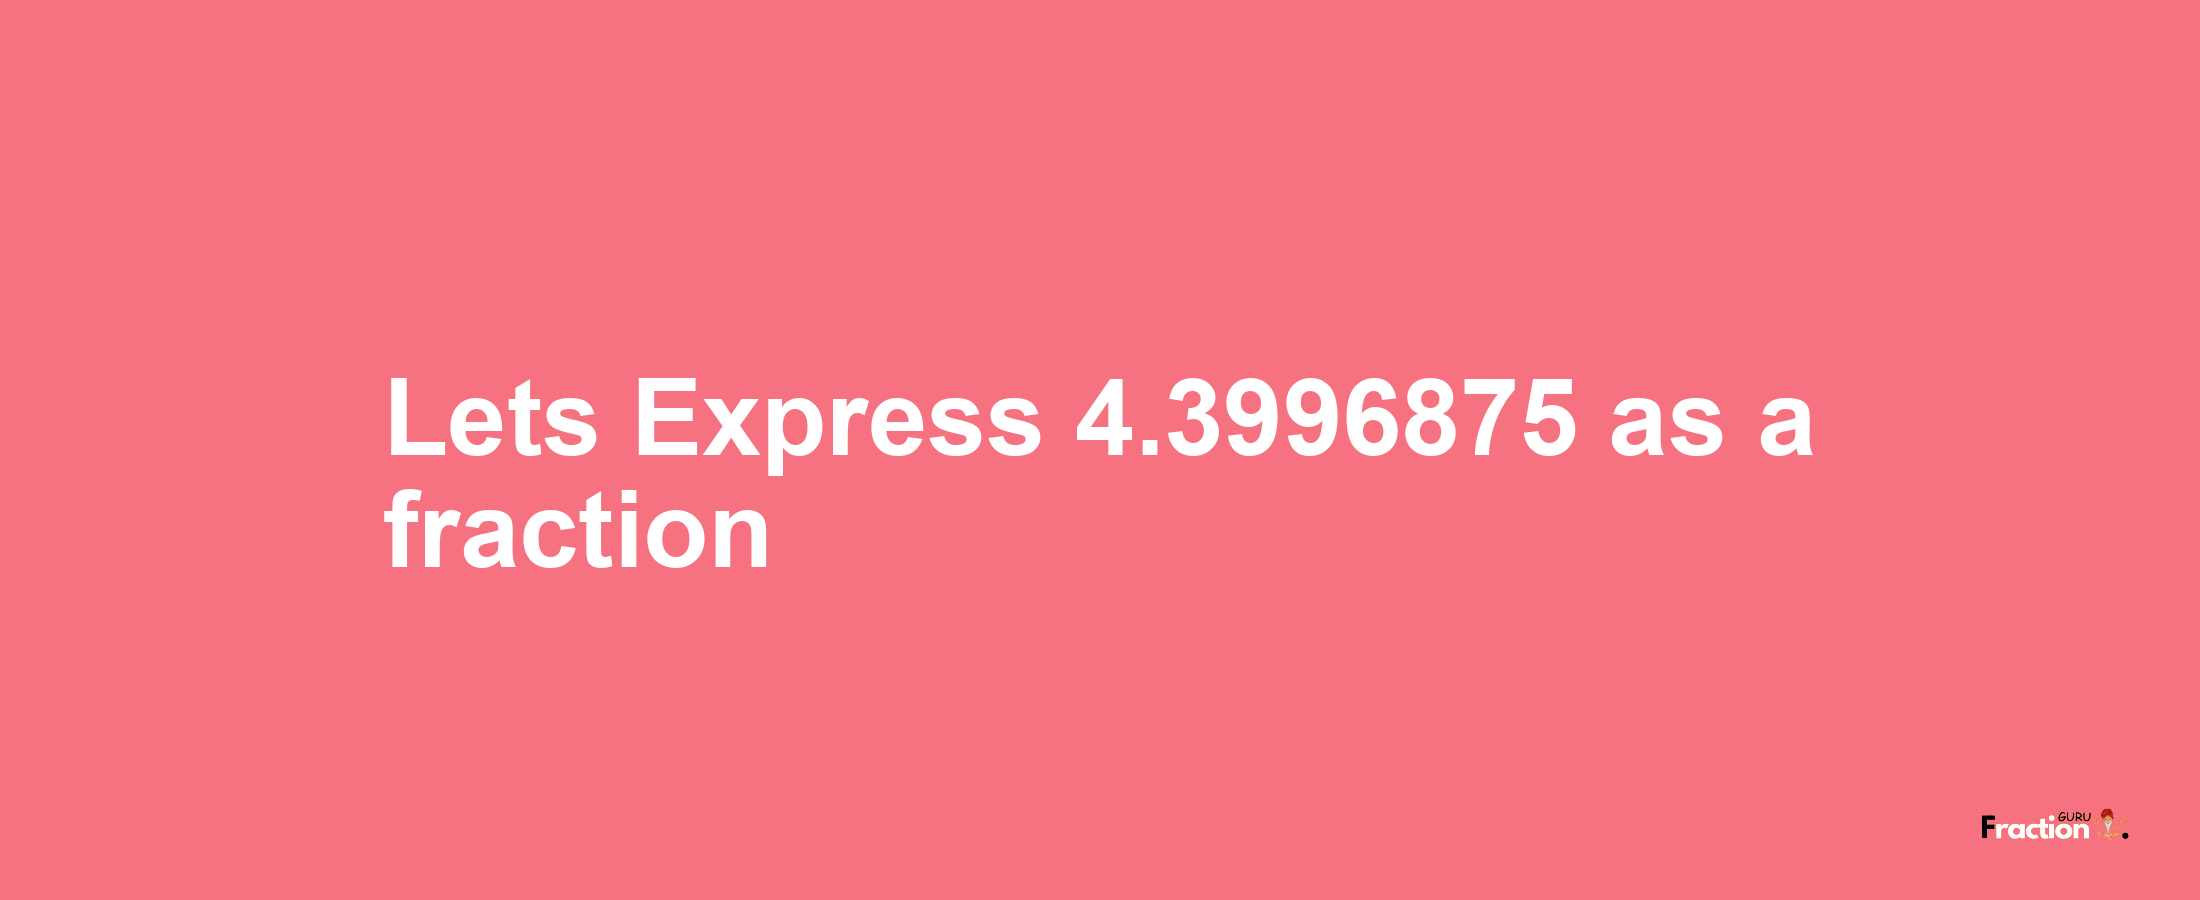 Lets Express 4.3996875 as afraction